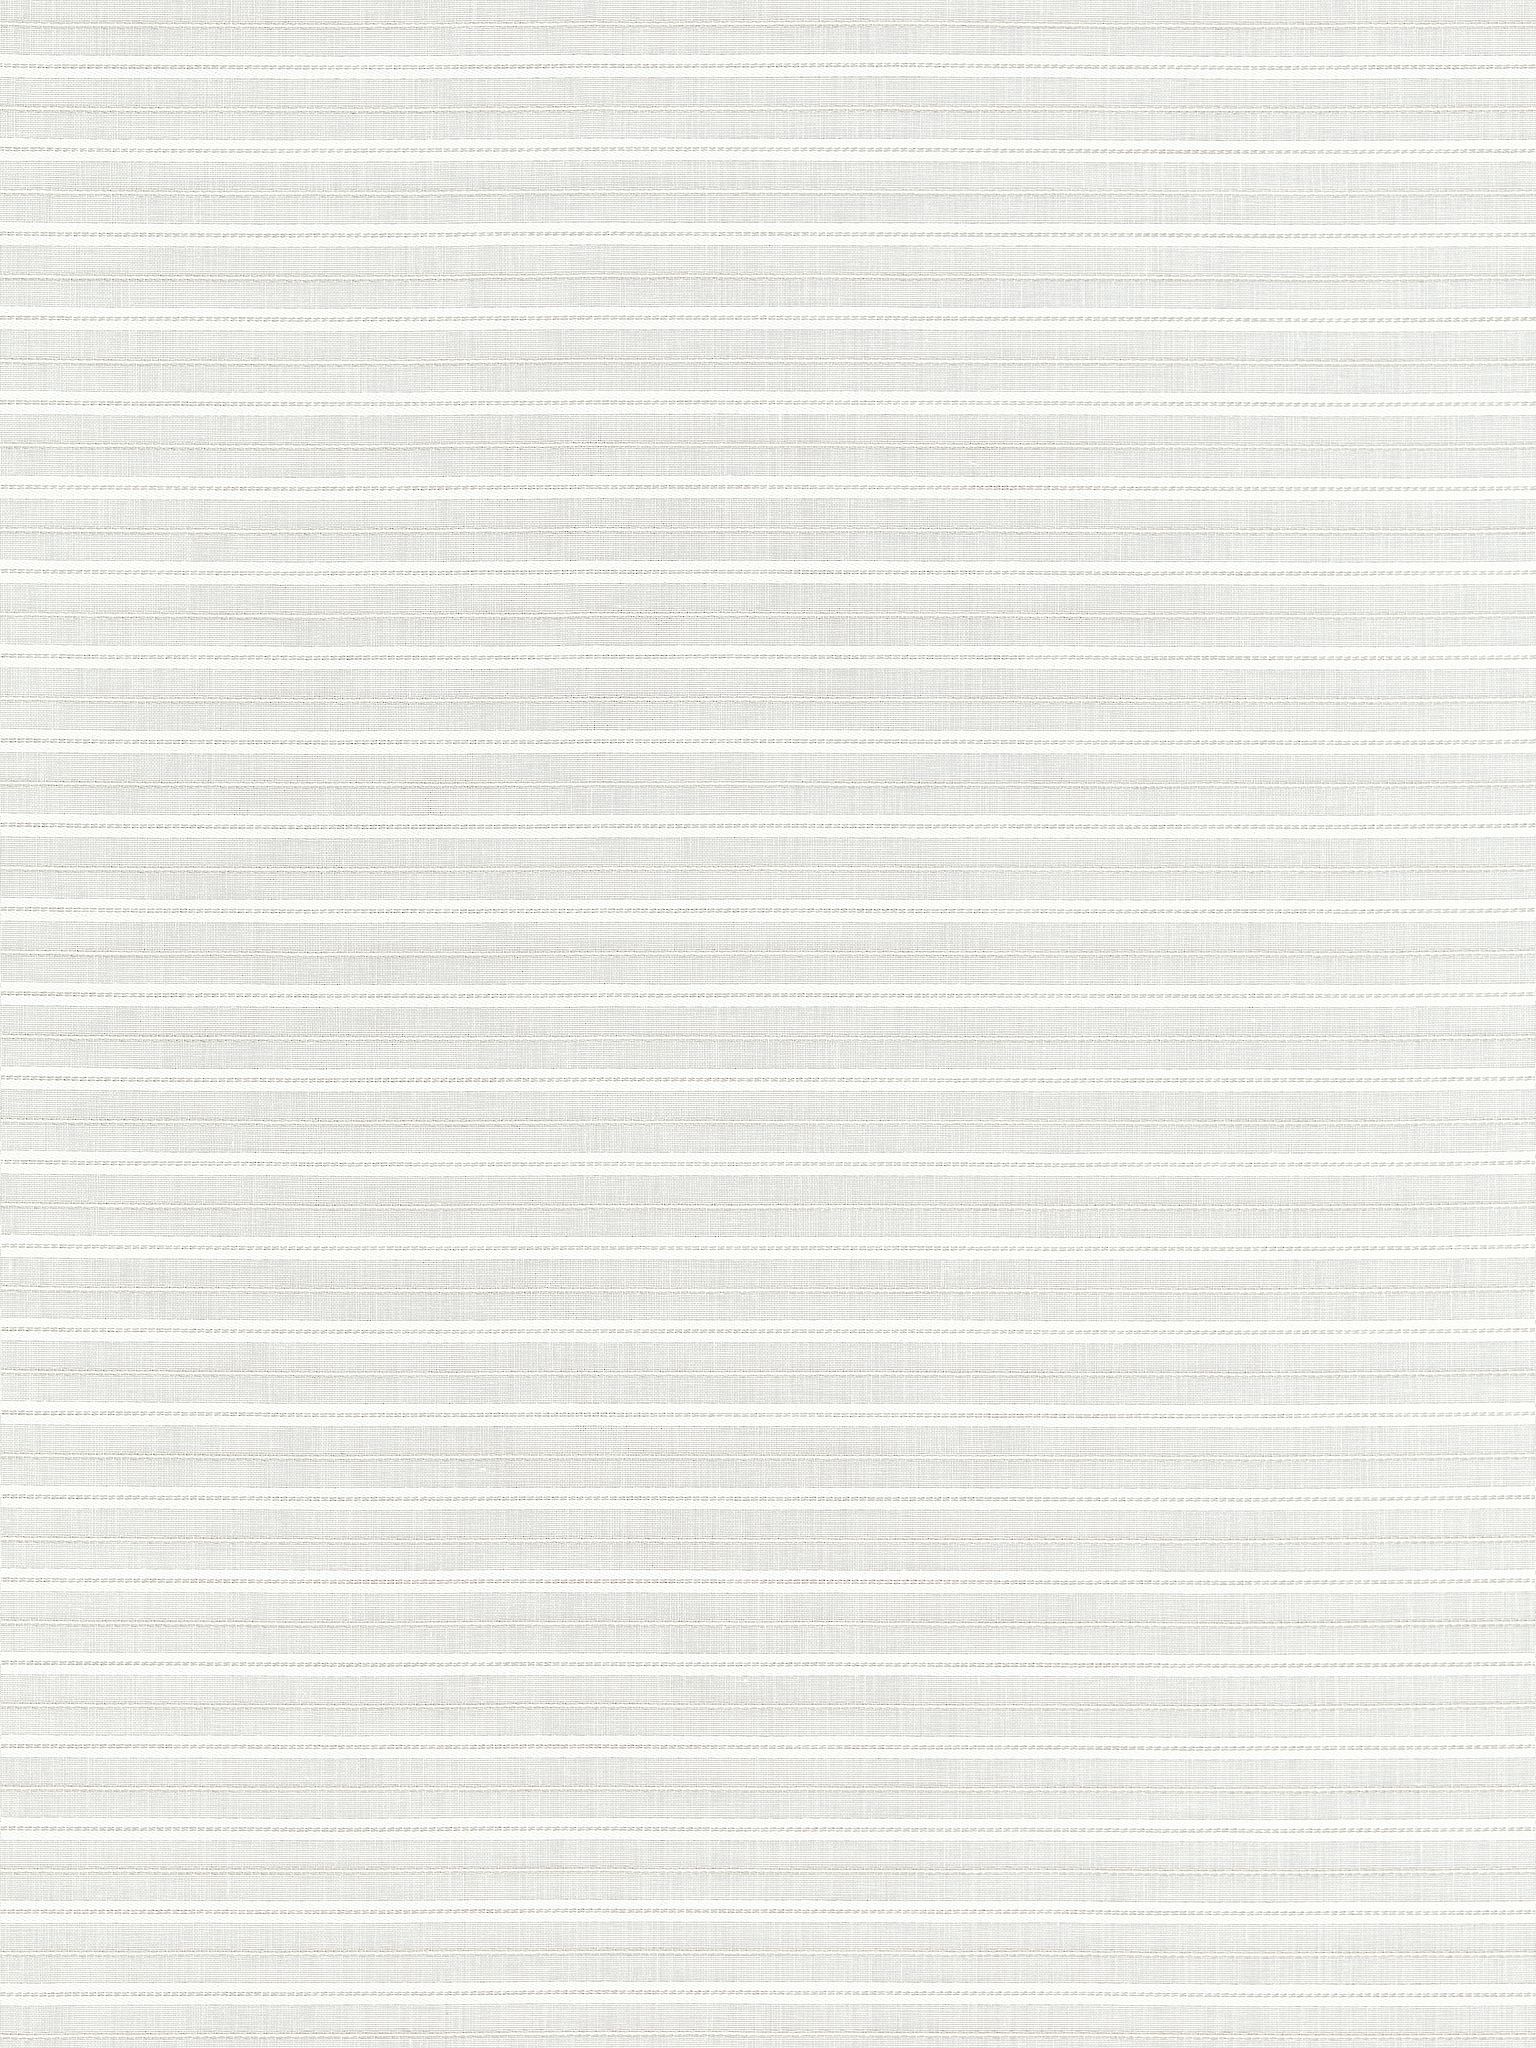 Harbor Stripe Sheer fabric in whelk color - pattern number SC 000127200 - by Scalamandre in the Scalamandre Fabrics Book 1 collection